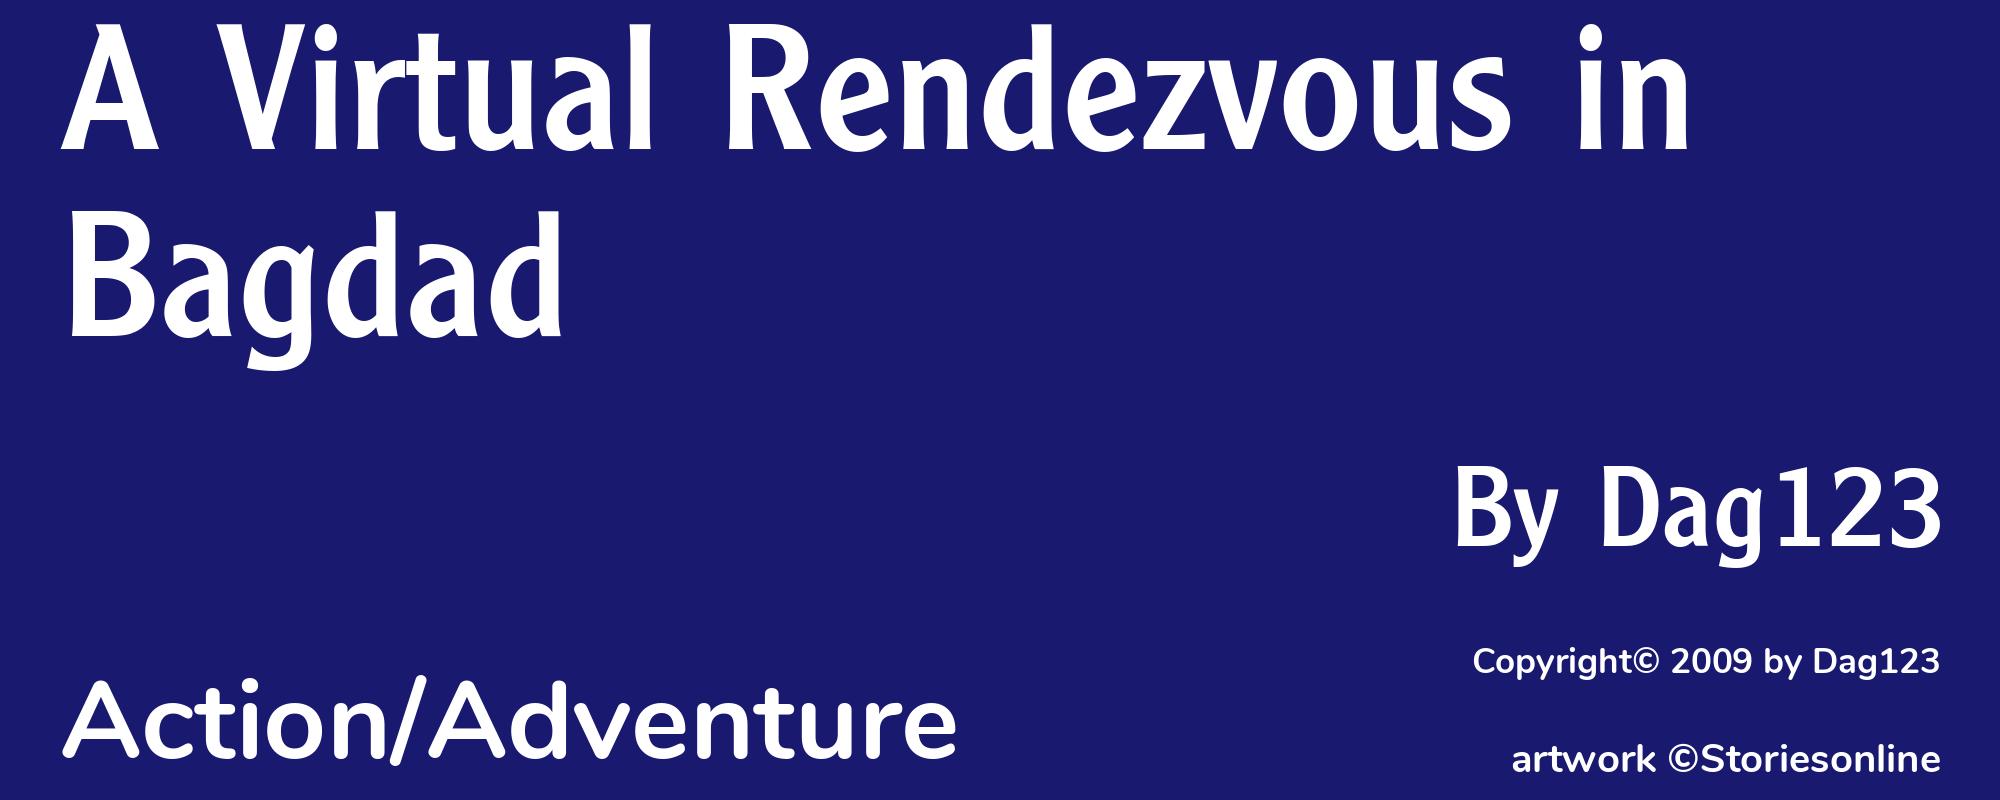 A Virtual Rendezvous in Bagdad - Cover